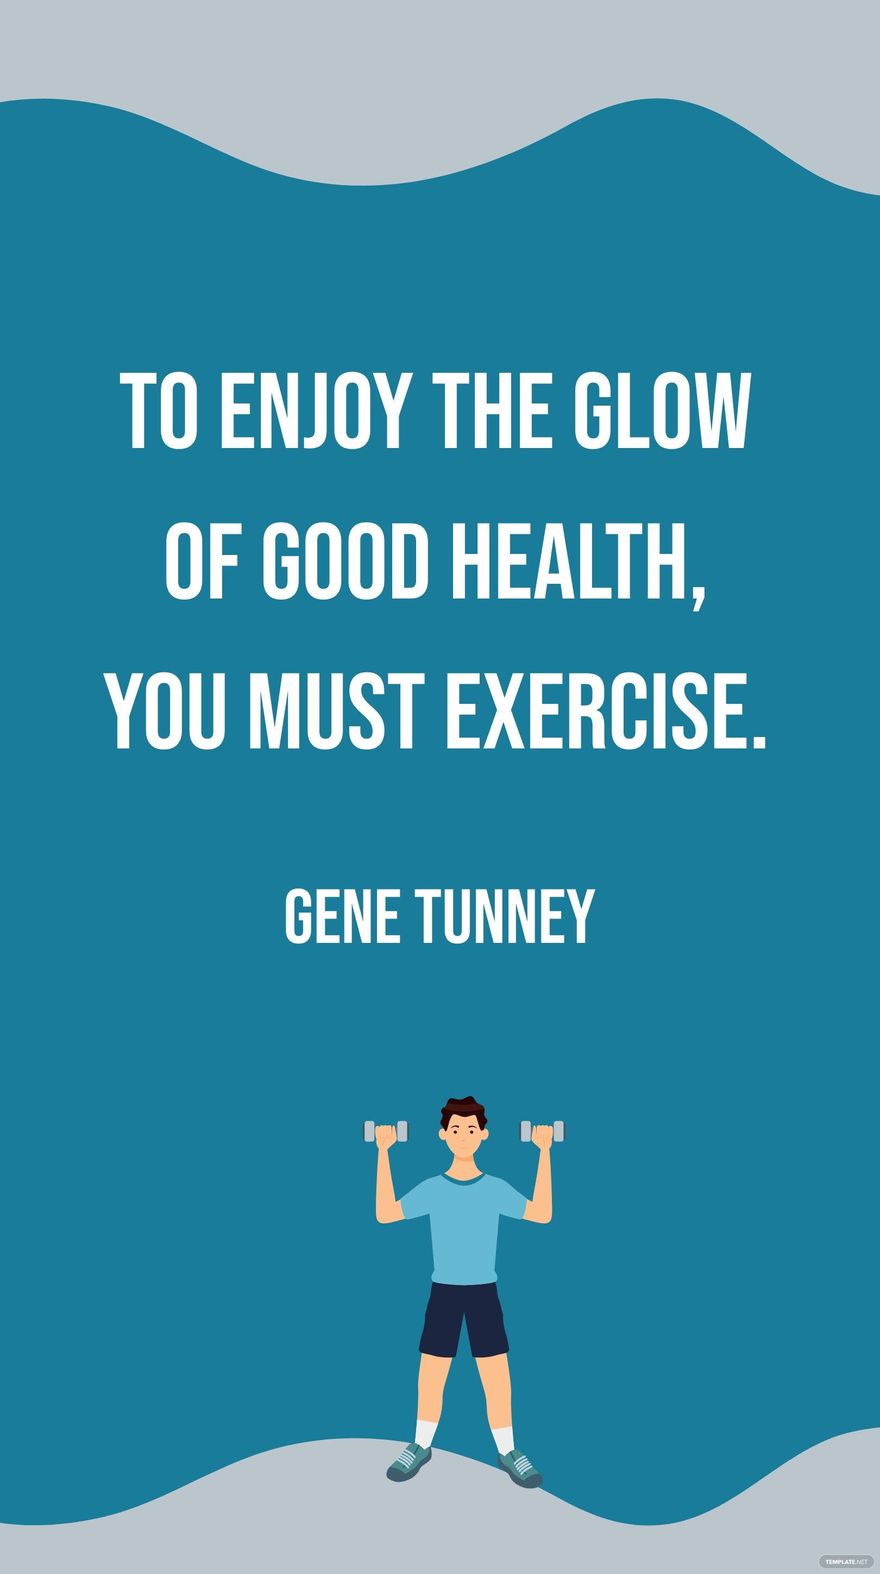 Gene Tunney - To enjoy the glow of good health, you must exercise.